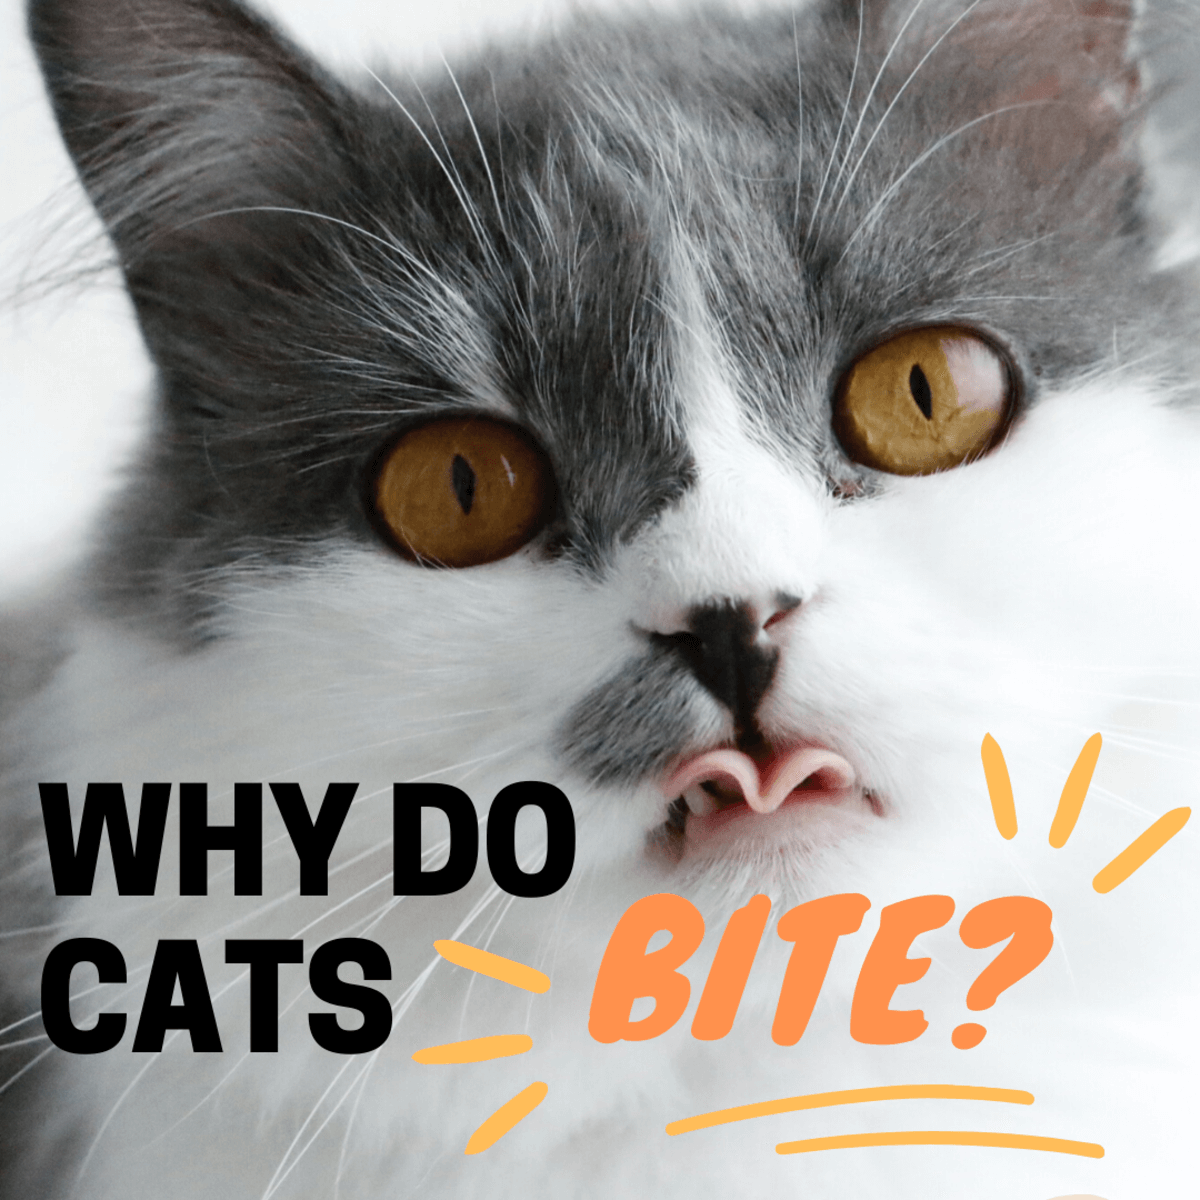 Why Do Cats Bite You?